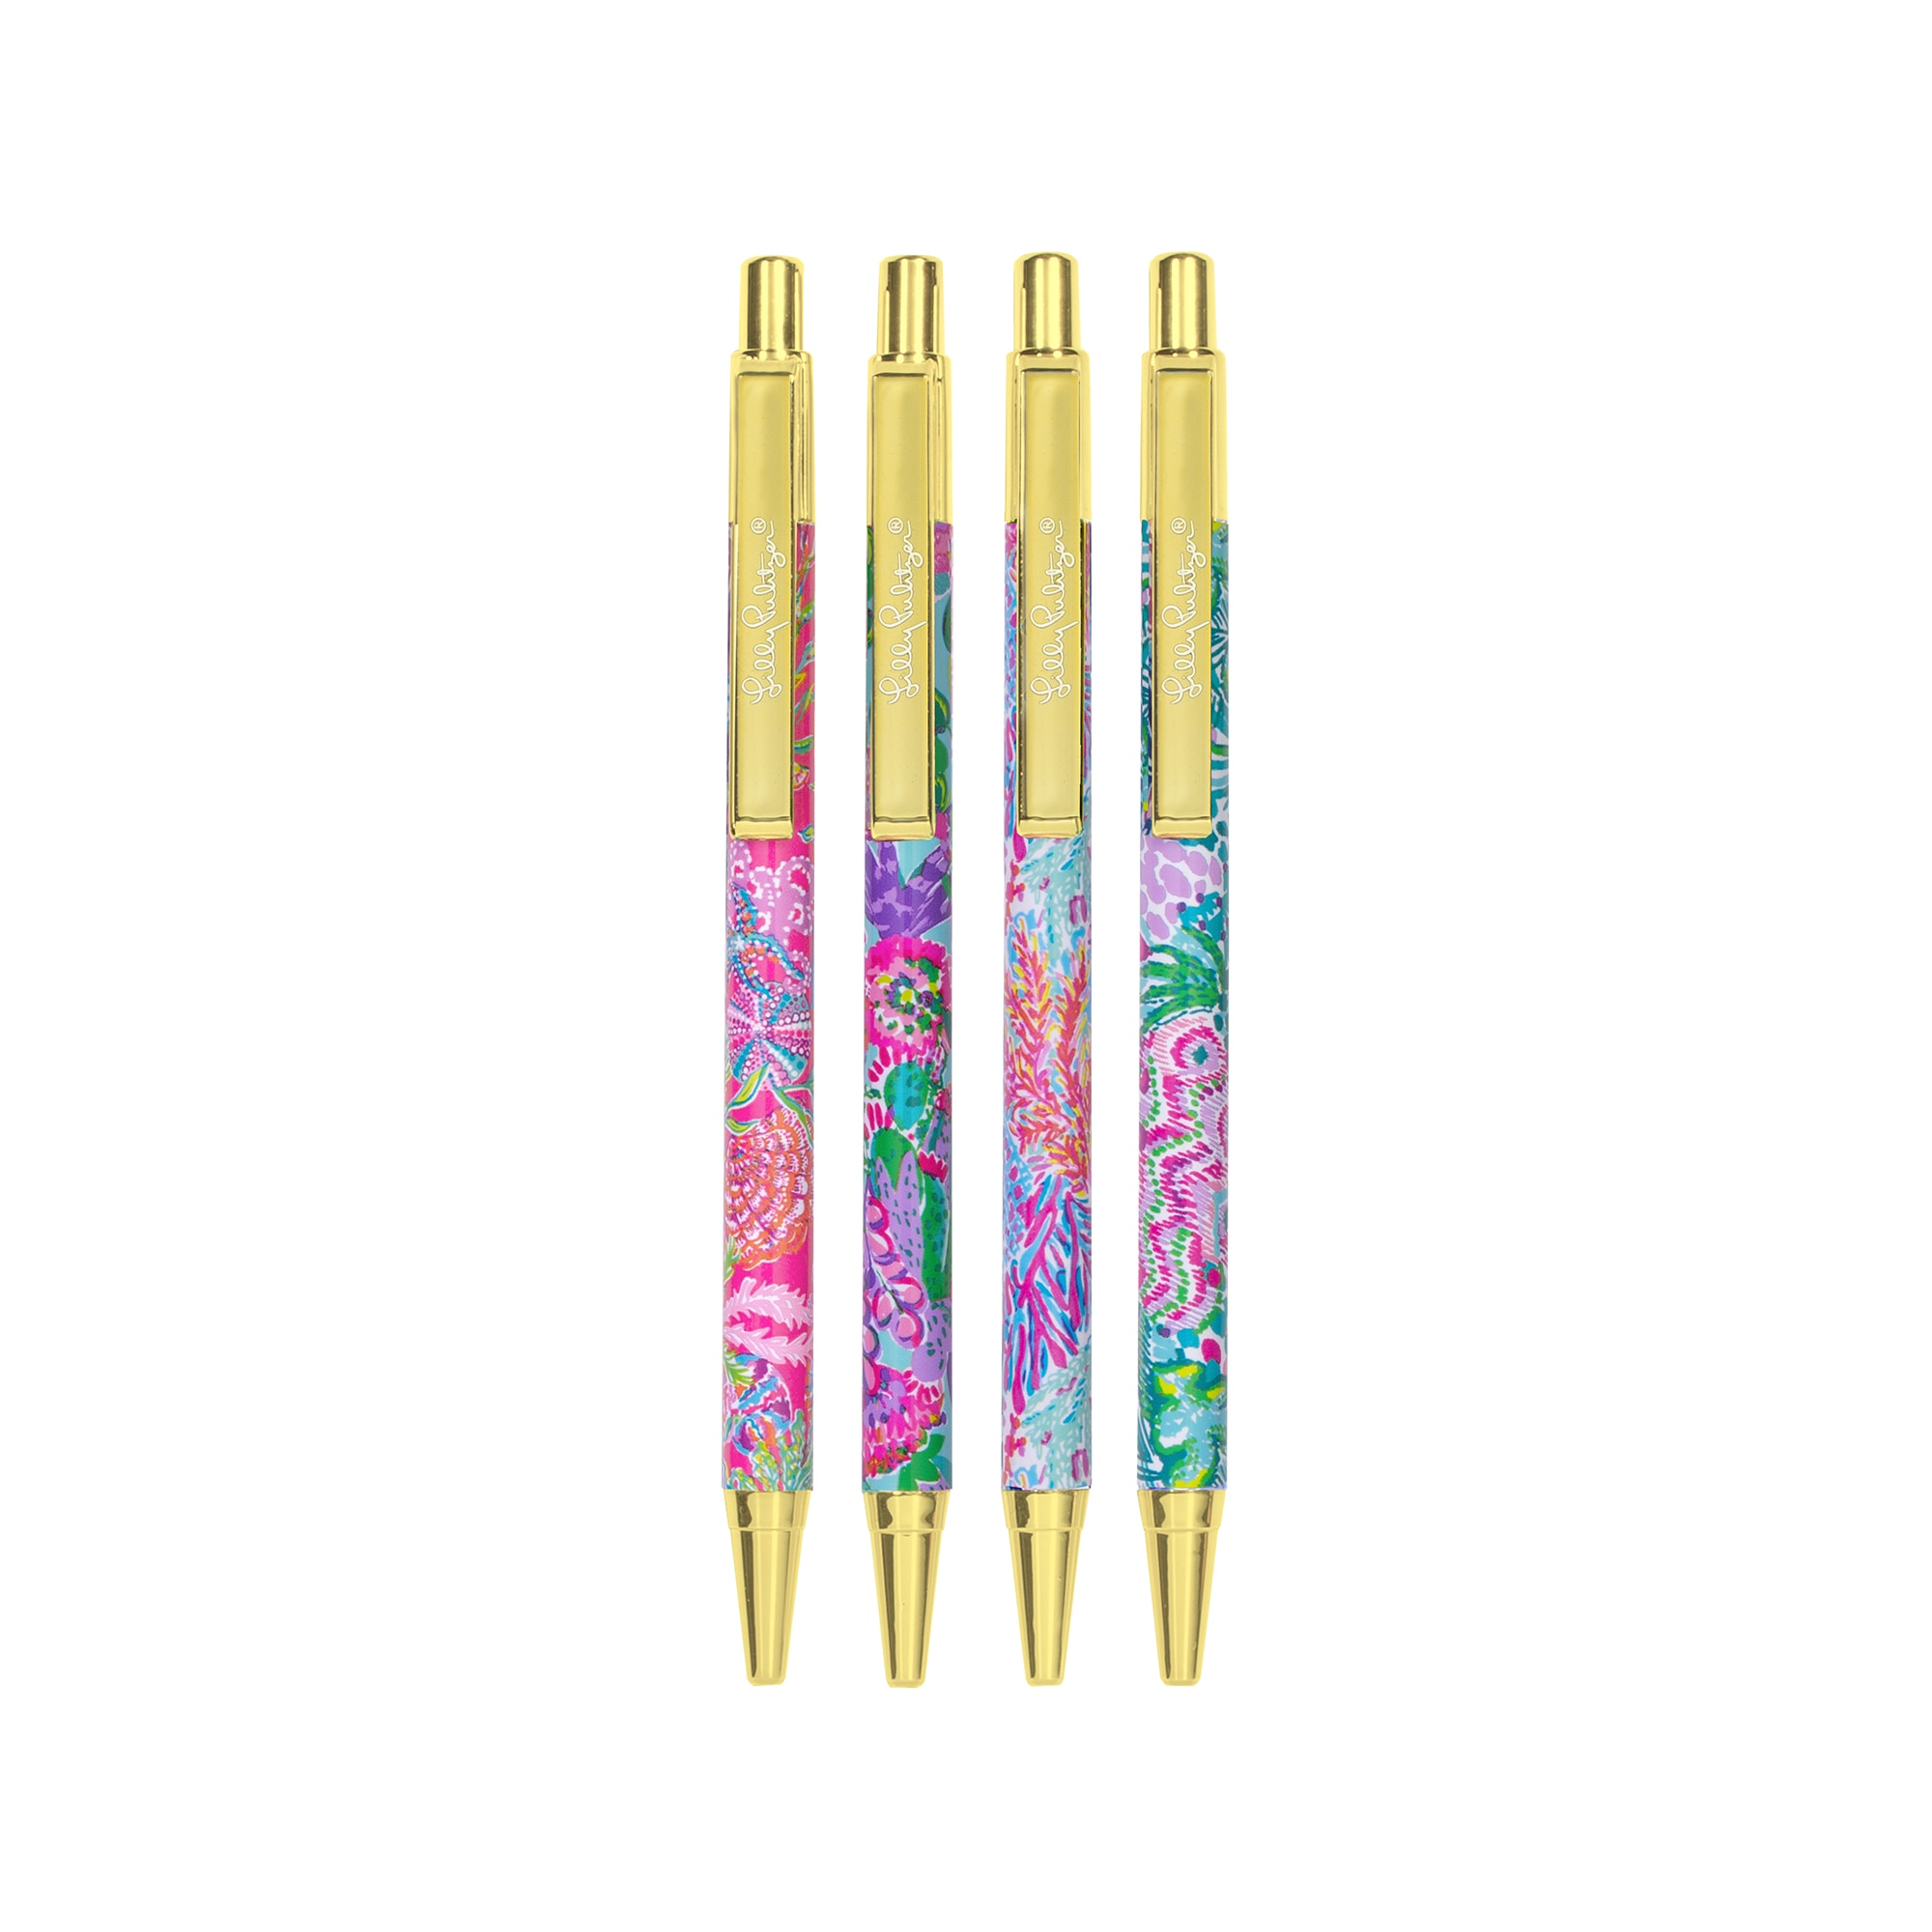 Lilly Pulitzer Pen Set Assorted